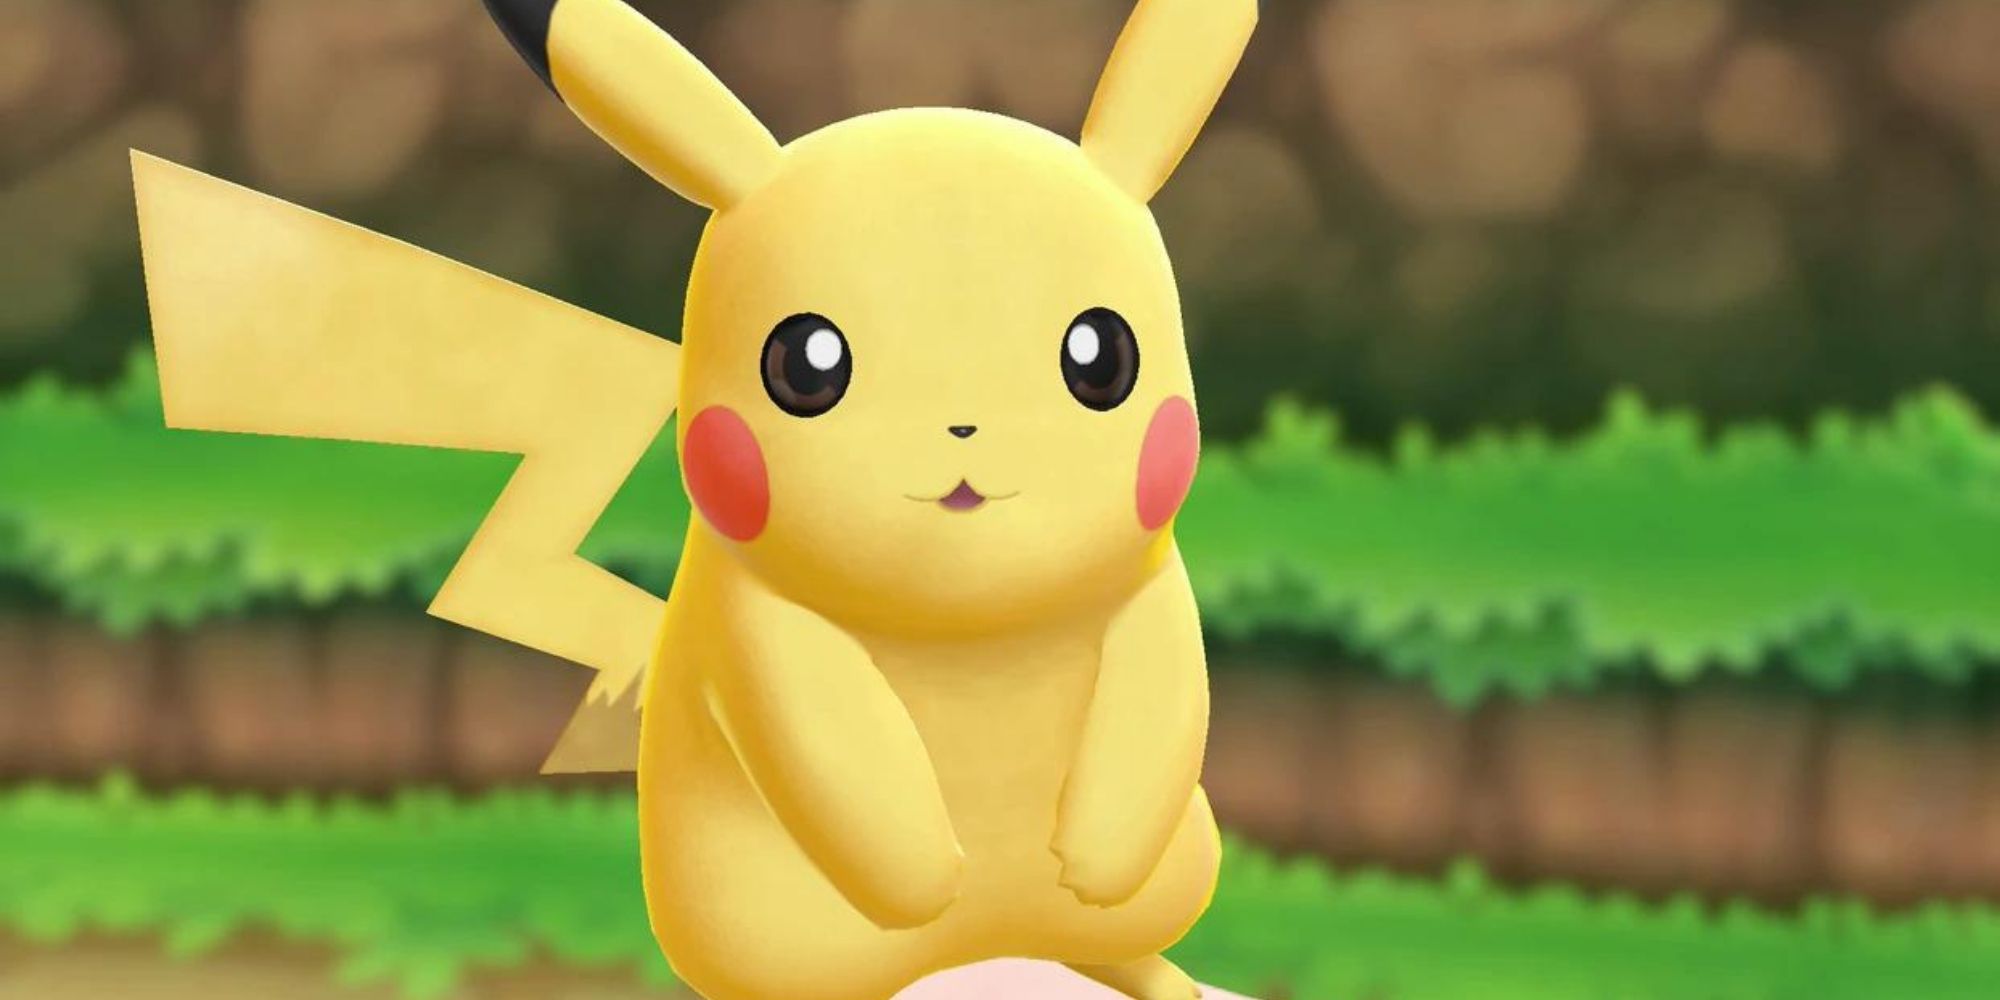 Pokemon Pikachu Looks Surprised Outside On A Route